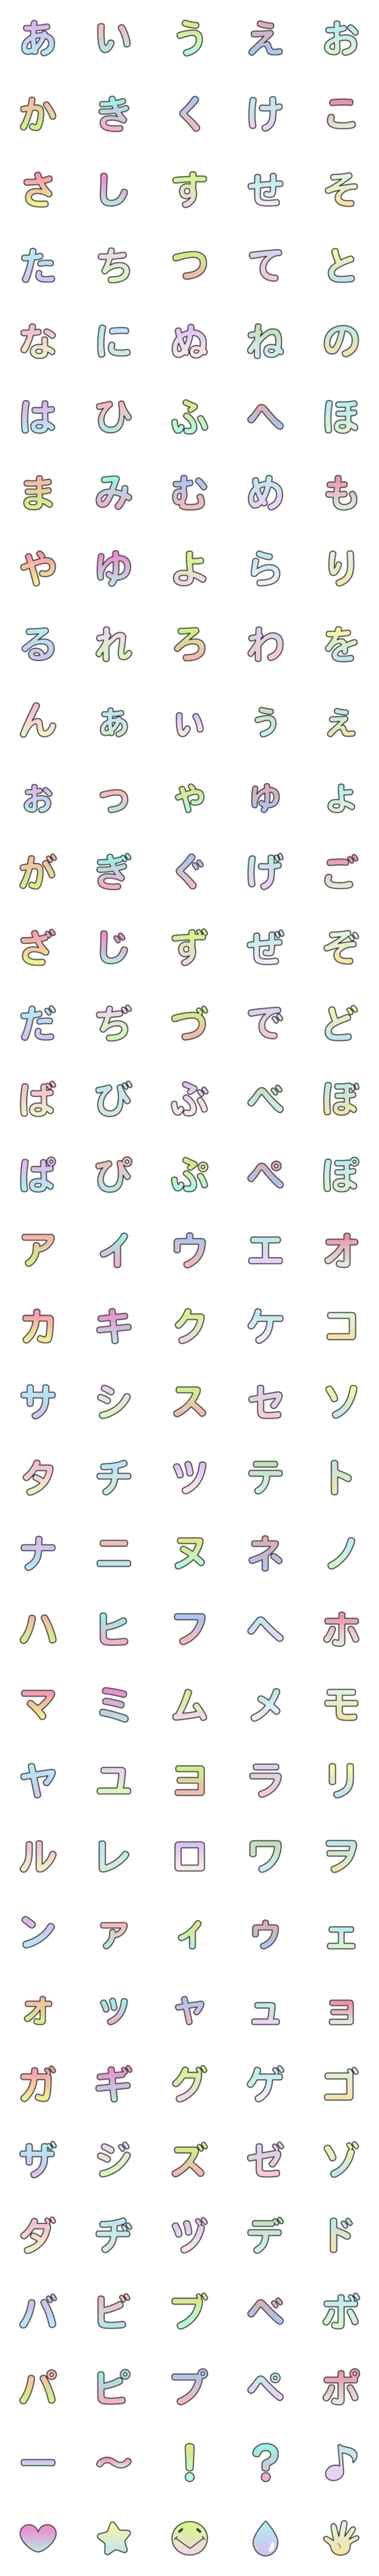 [LINE絵文字]aall-グラデーションデコ文字-かなカナの画像一覧